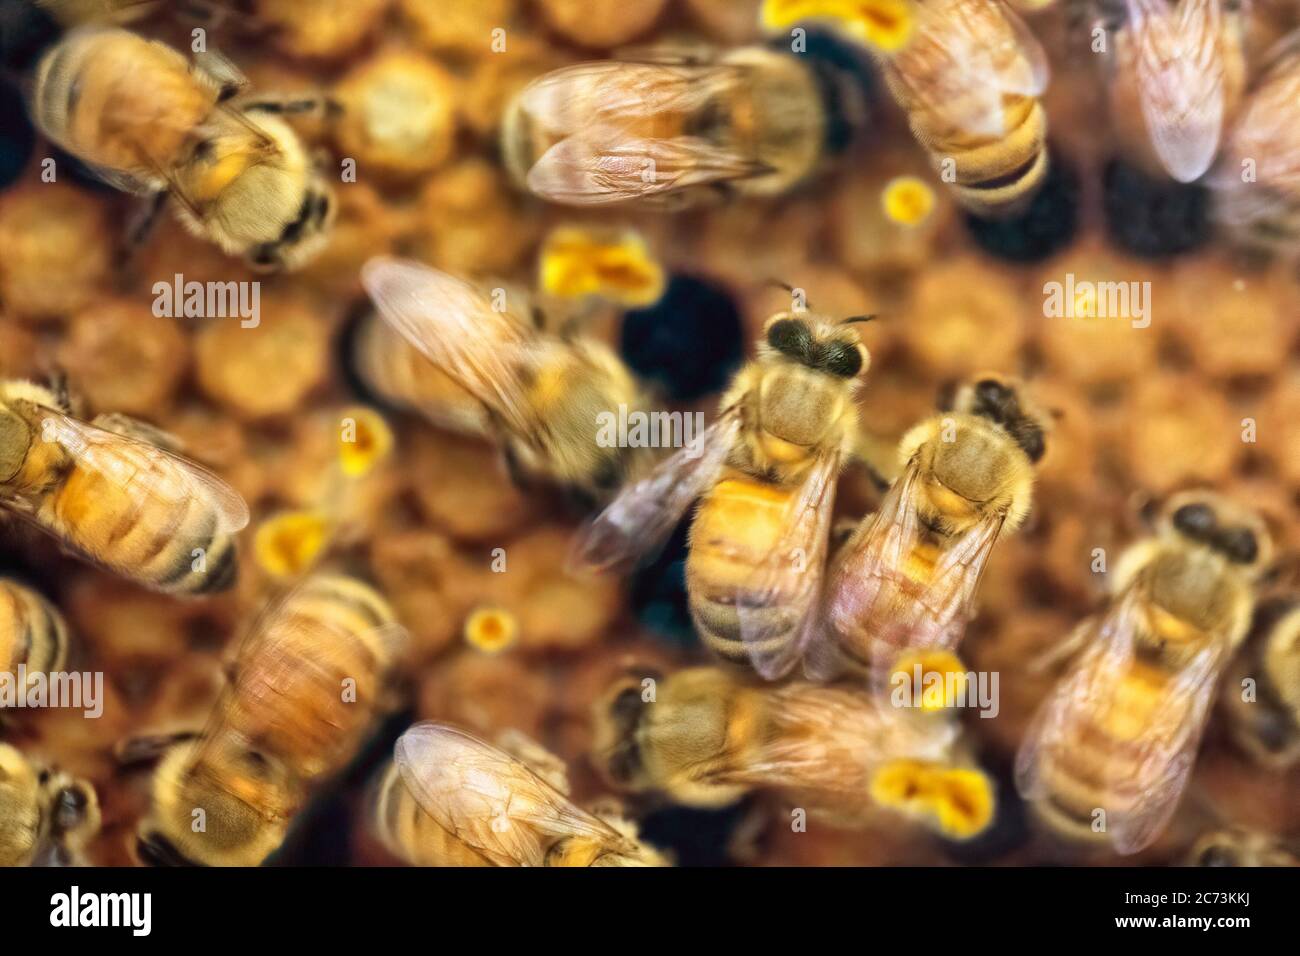 Close-up of busy and hectic life of honey bees feeding their young generations on the honeycomb in the apiary. Soft focus with blurry movement. Stock Photo